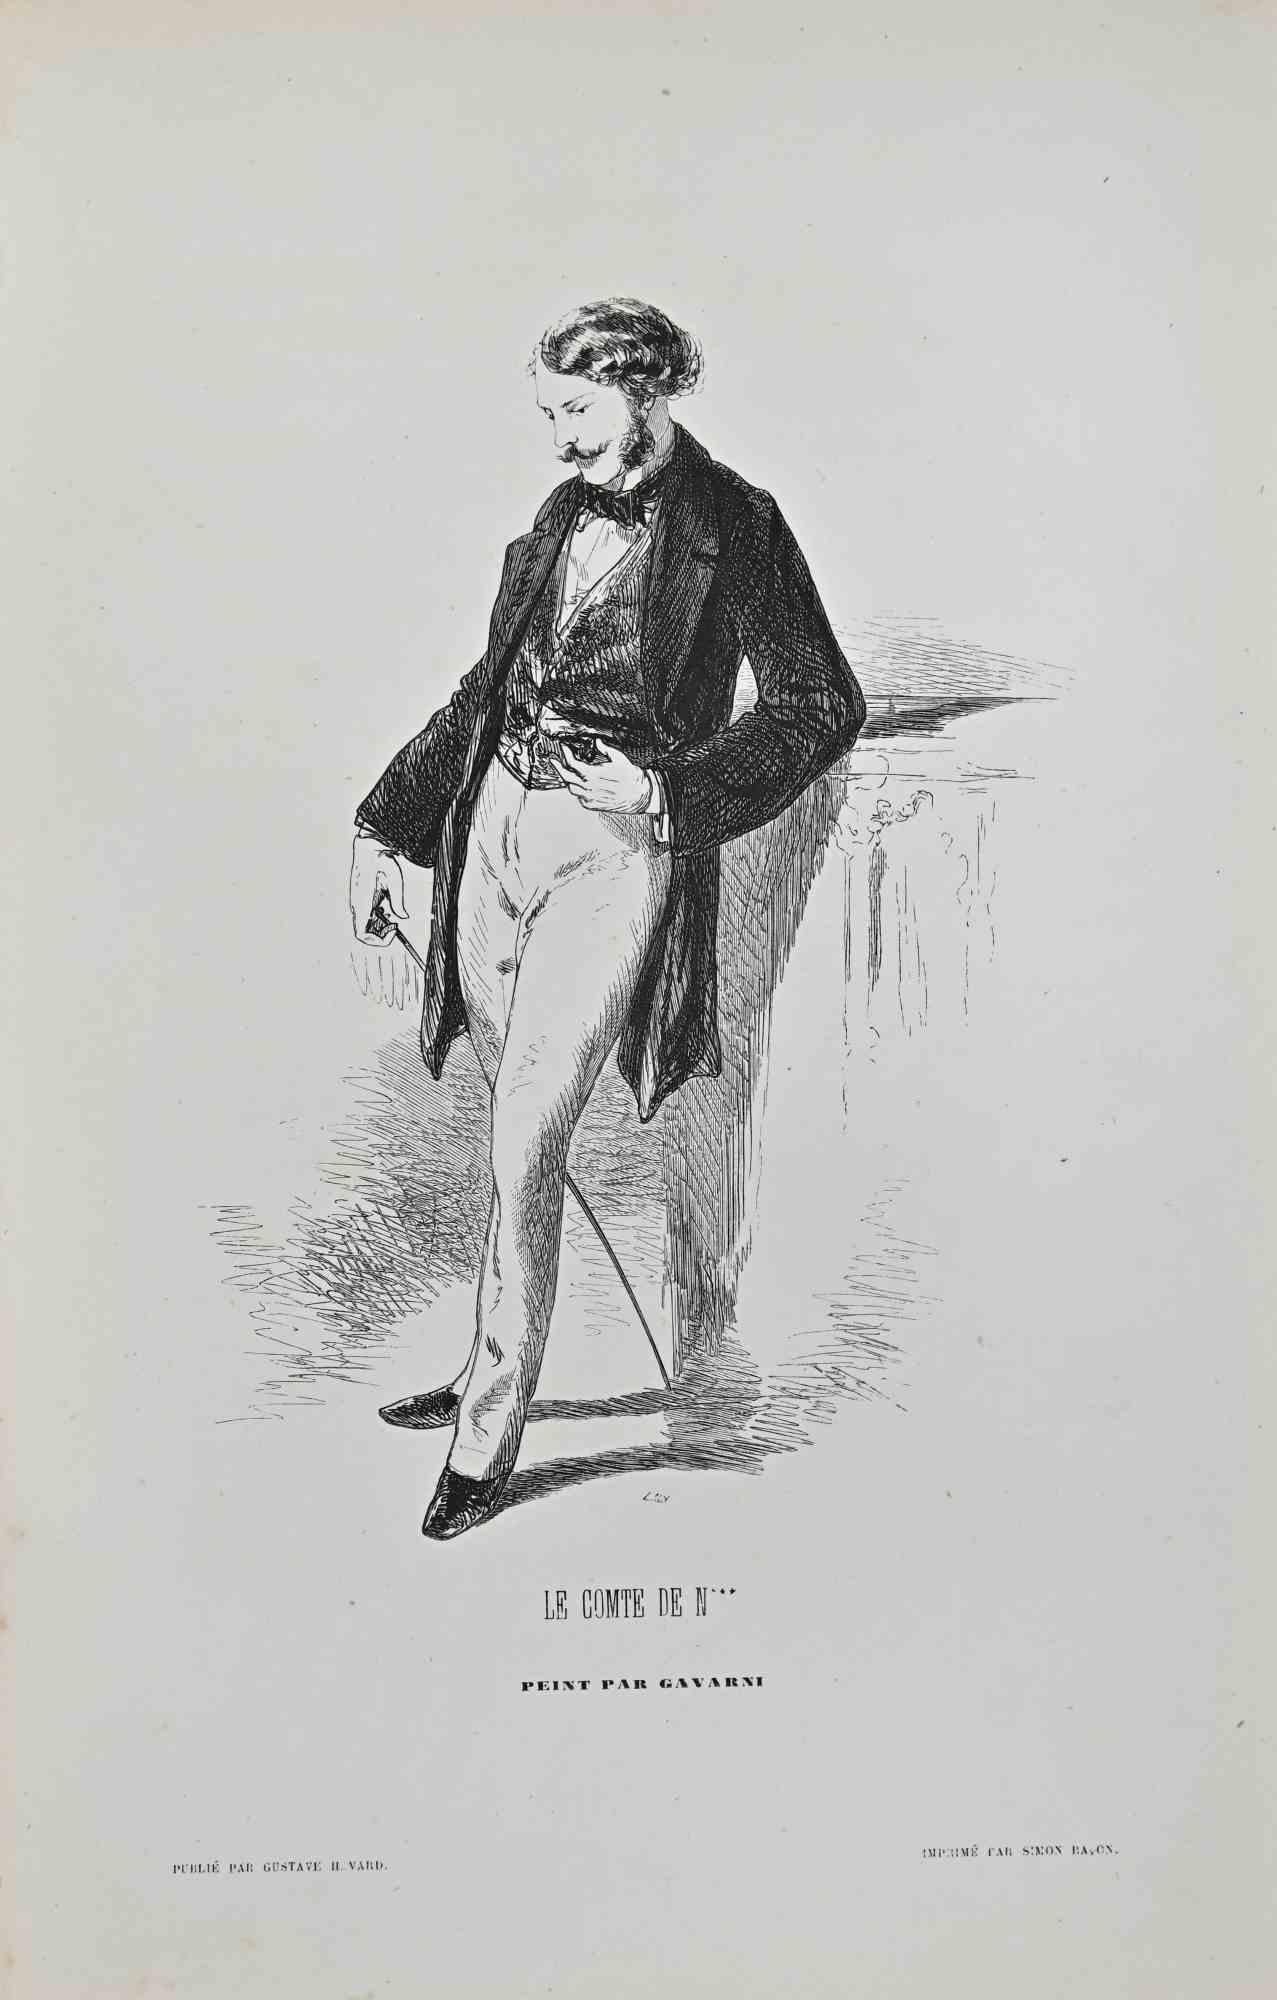 Le Comte De N is a lithograph on ivory-colored paper, realized by the French draftsman Paul Gavarni (alias Guillaume Sulpice Chevalier Gavarni, 1804-1866) in the mid-19th Century.

Signed on the plate" Par Gavarni".

From series of "Masques et